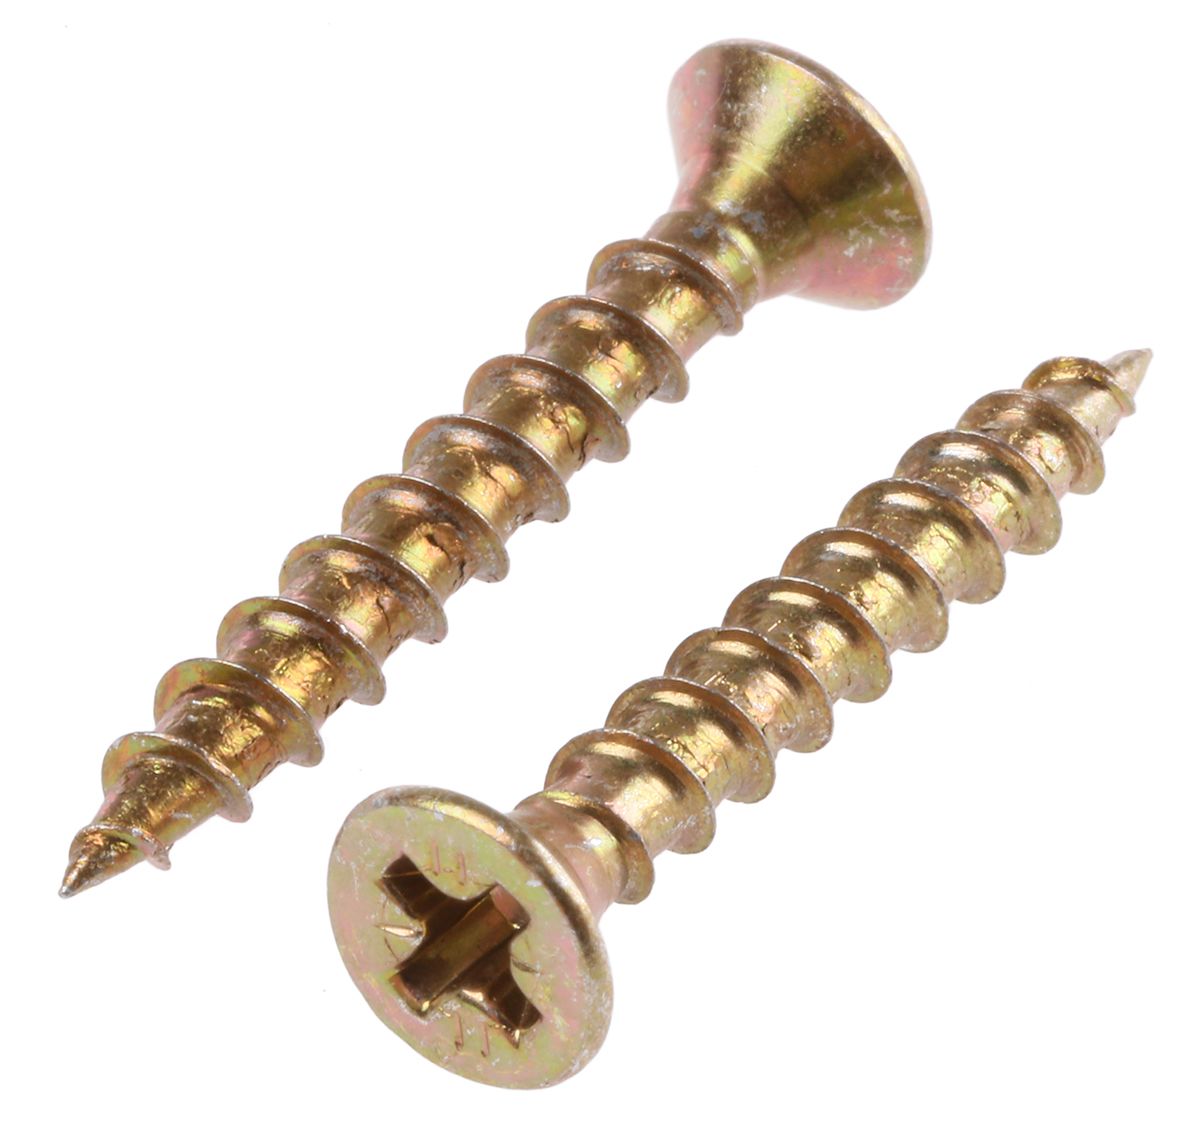 ULTI-MATE Pozisquare Countersunk Steel Wood Screw Yellow Passivated, Zinc Plated, 4mm Thread, 30mm Length